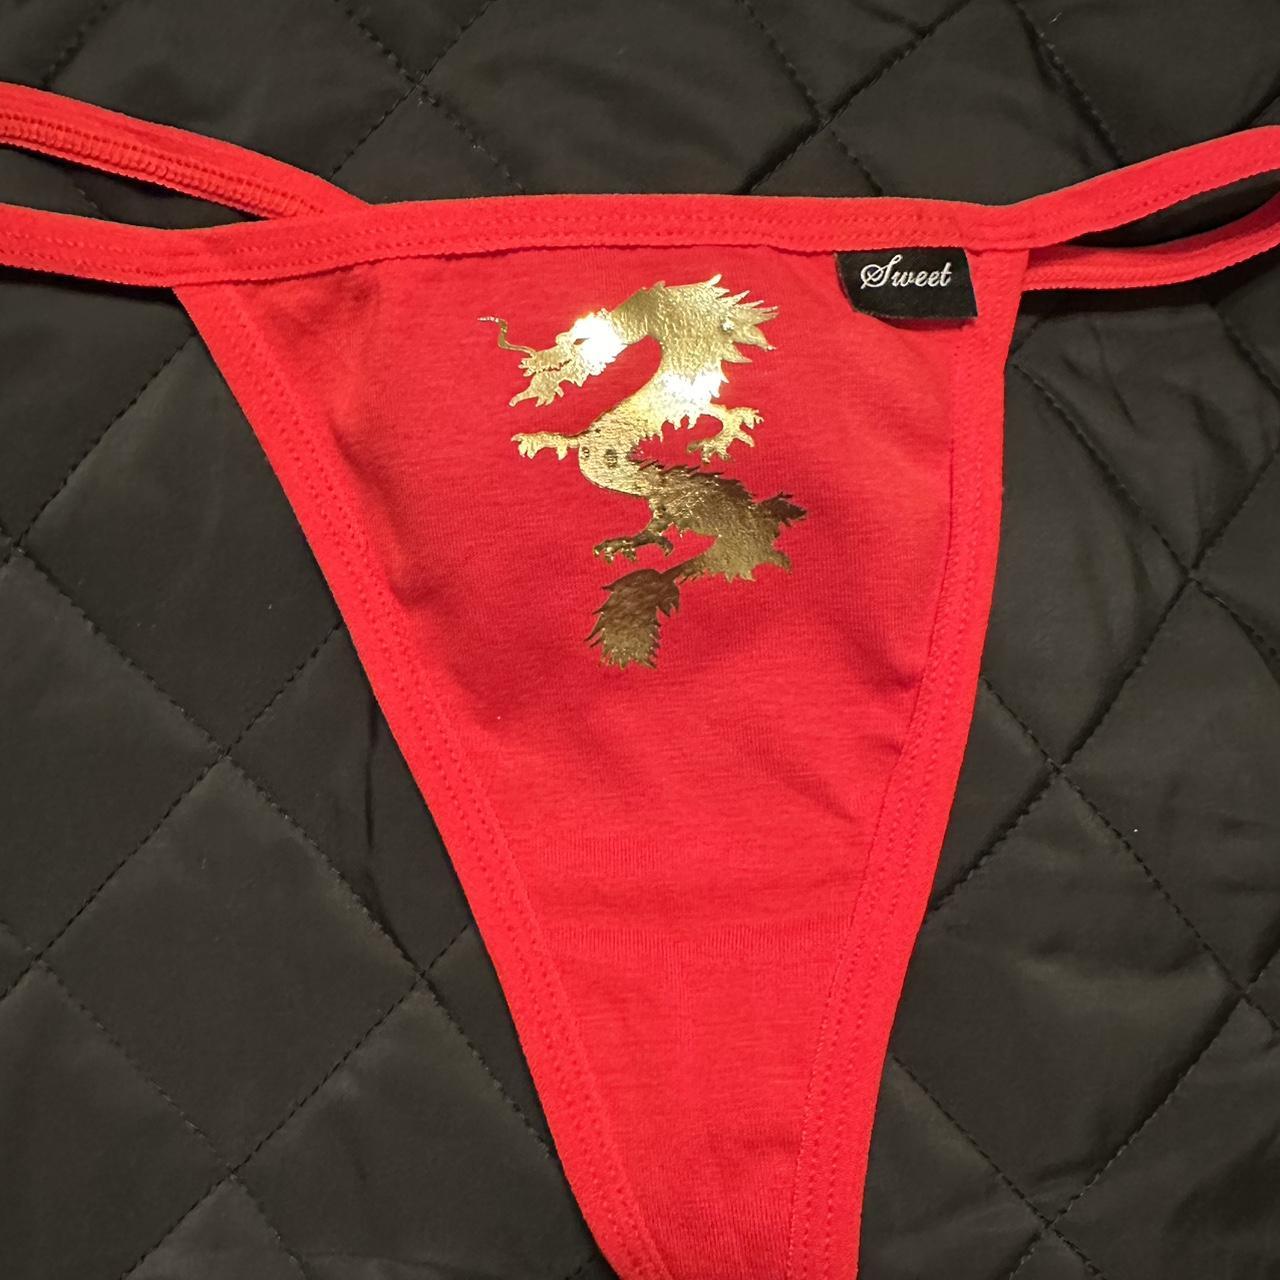 Lunar New Year Thong with golden dragon., Sizes S 